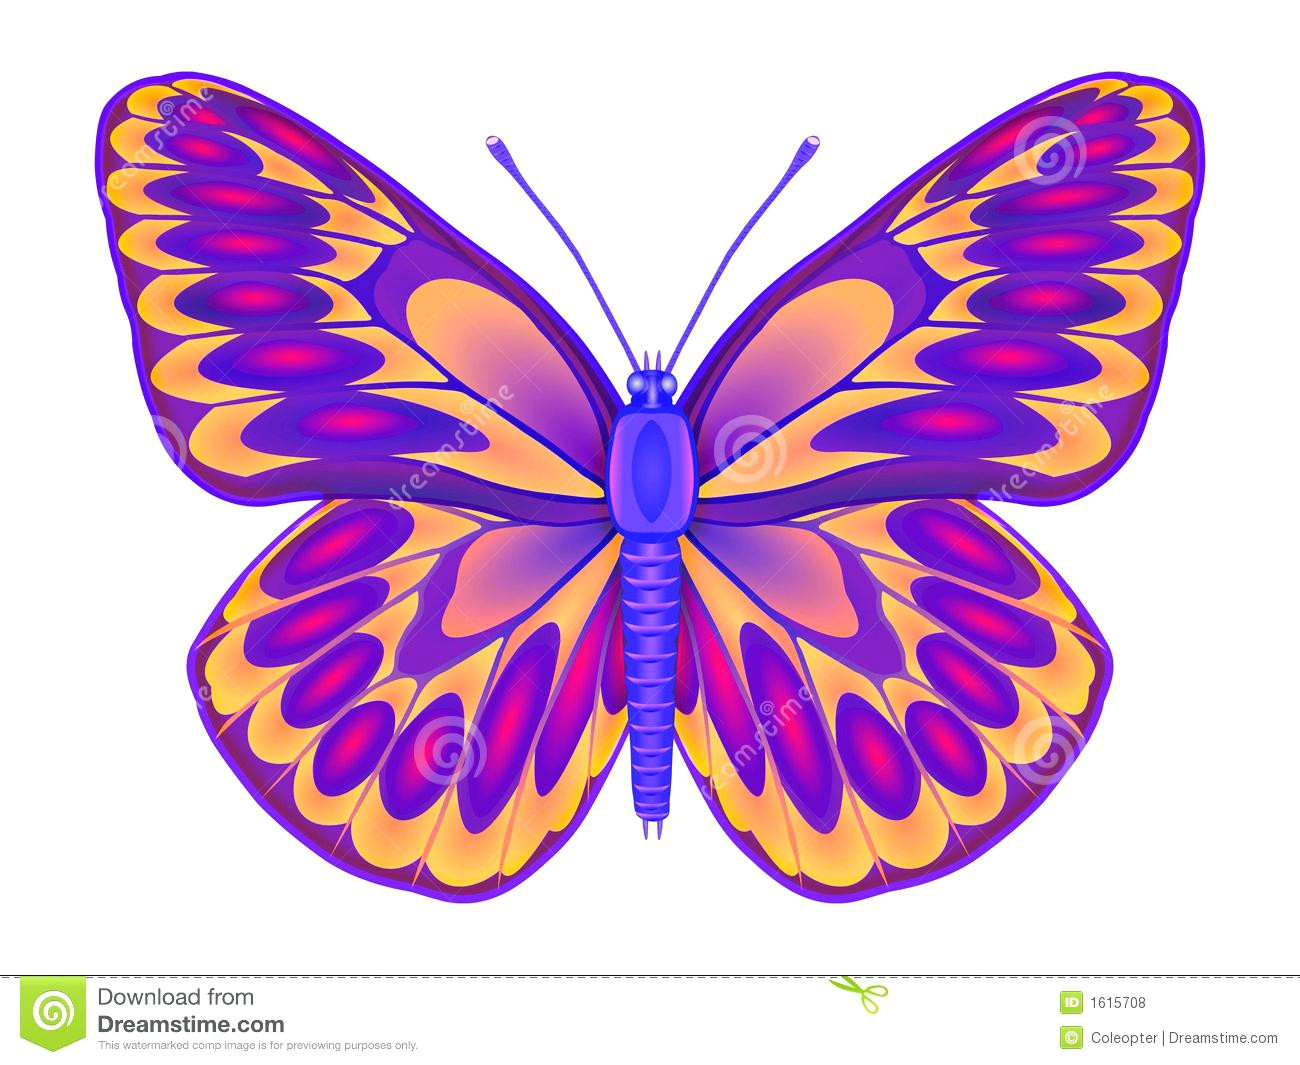 Butterfly Drawings with Color Easy Coloring Pages Splendiy Pictures to Color Image